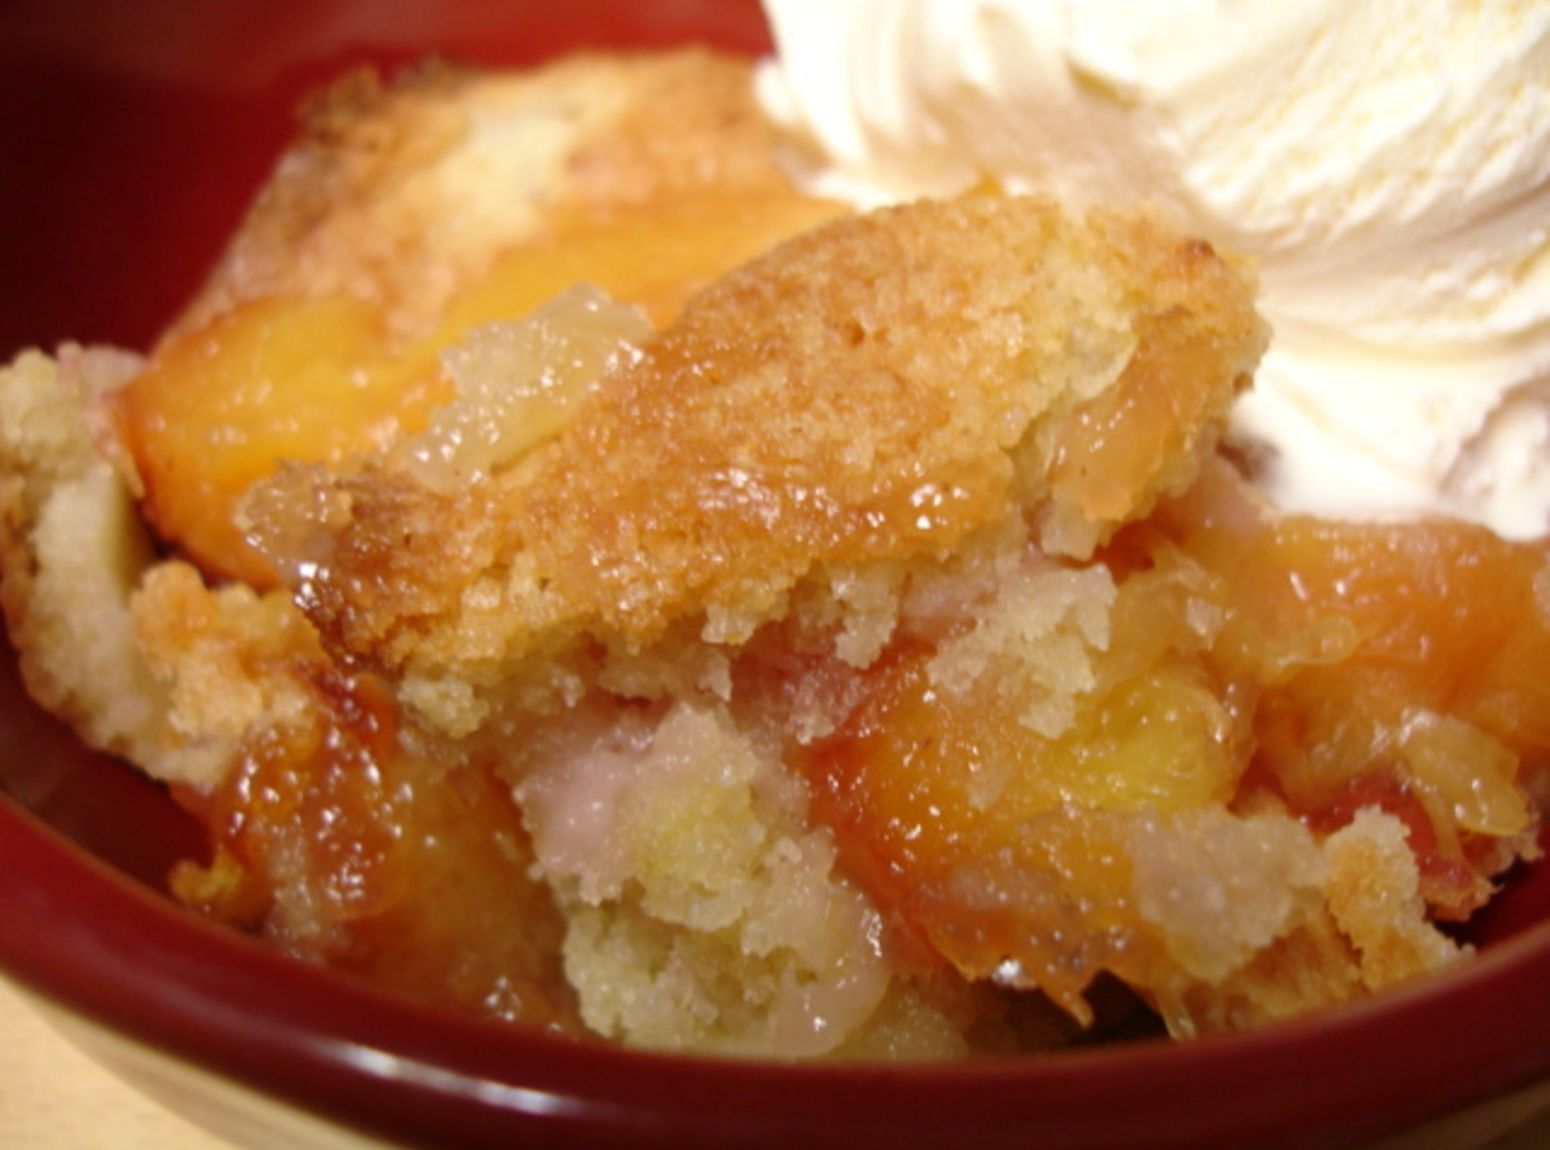 Georgia Peach Cobbler. OMG-GOOD!! Only 4 ingredients: Sugar, Flour, Butter, and